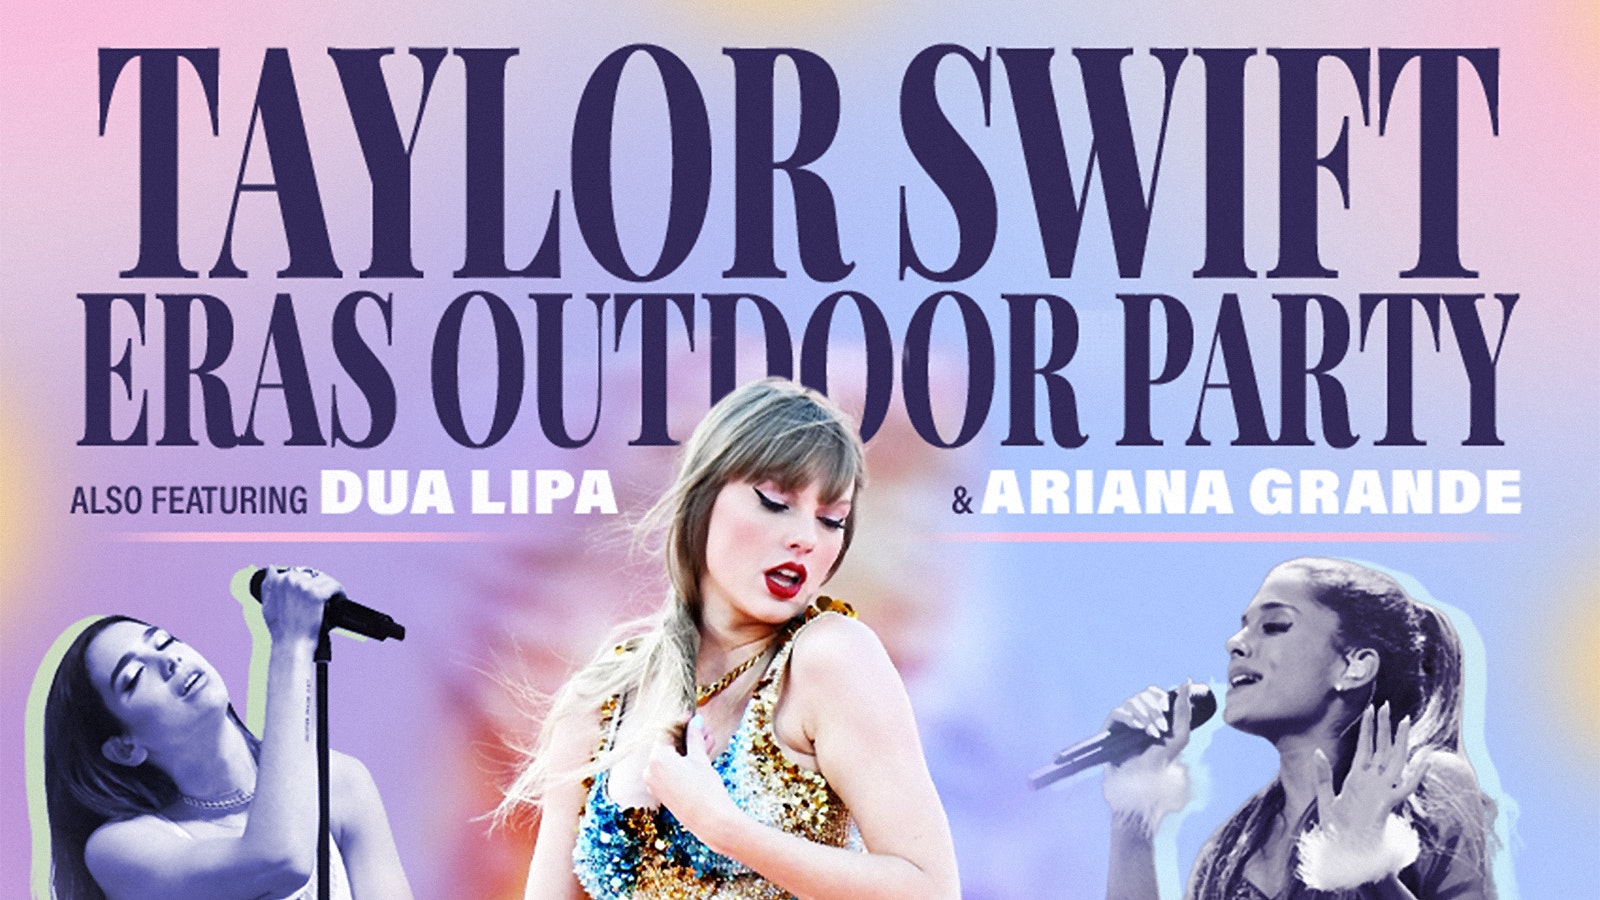 🐍 Taylor Swift The Eras Outdoor Party also ft Dua Lipa and Ariana Grande tributes